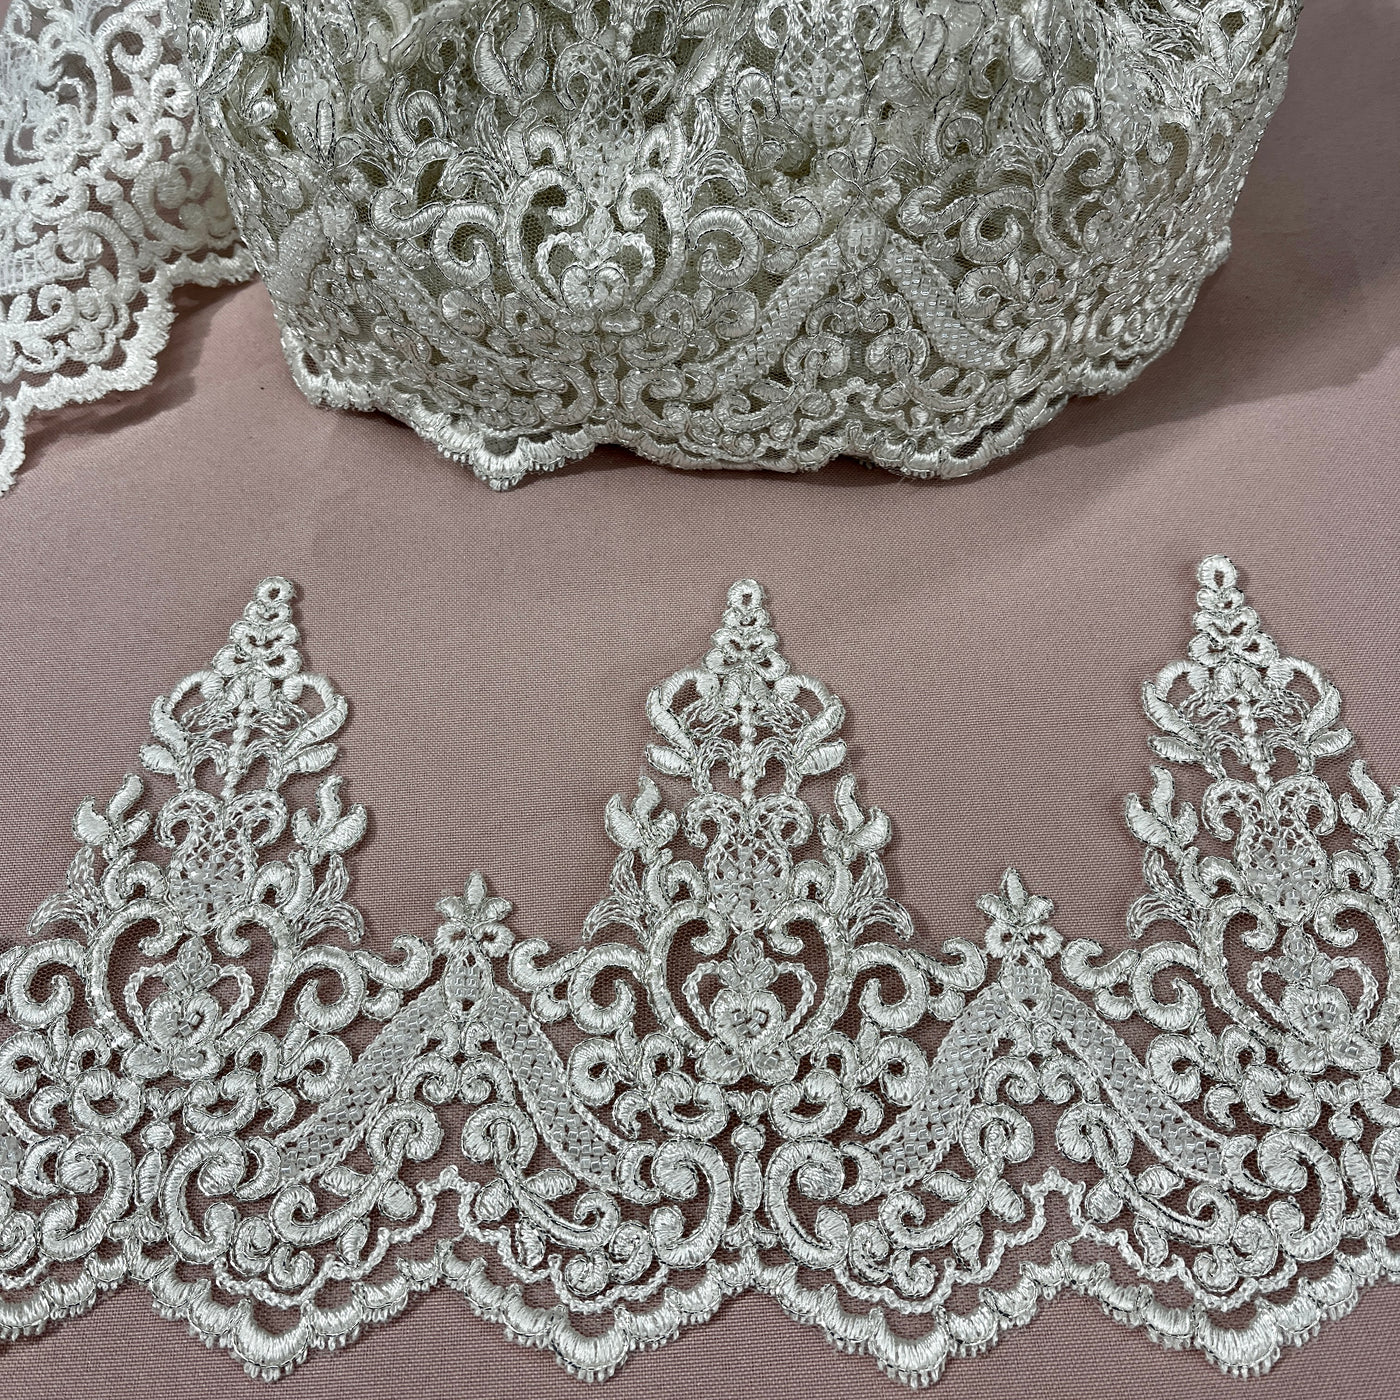 Beaded & Corded Lace Trimming Embroidered on 100% Polyester Organza | Lace USA - 97014W-HB